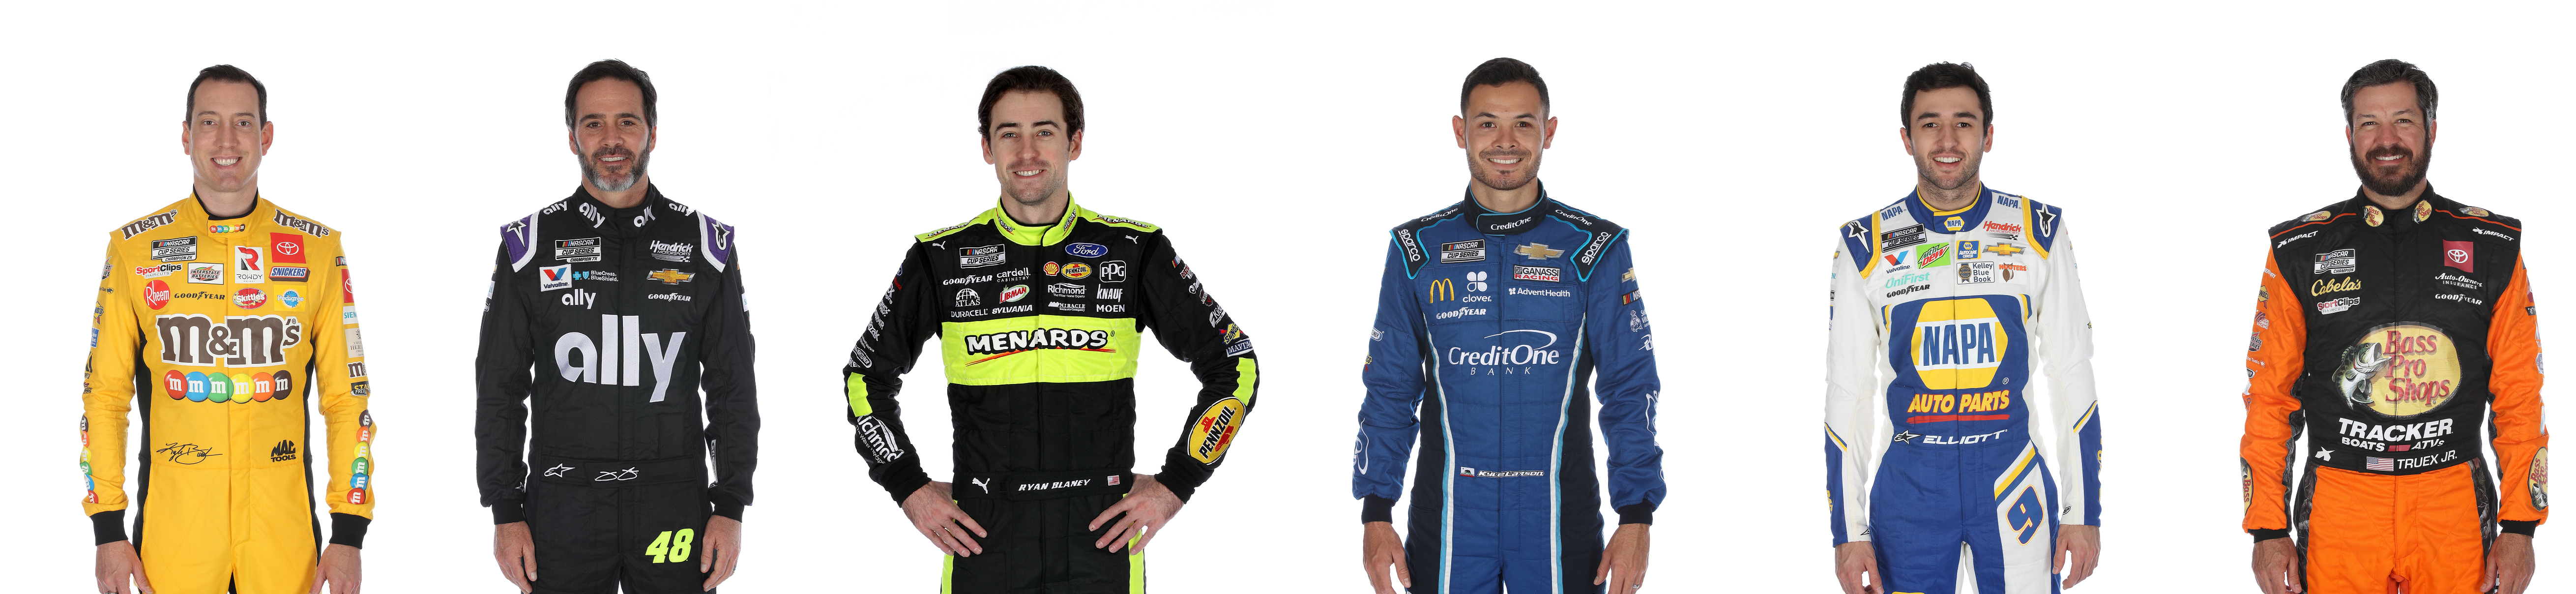 Correspondingly, it's a wide open selection of Auto Club 400 race picks.